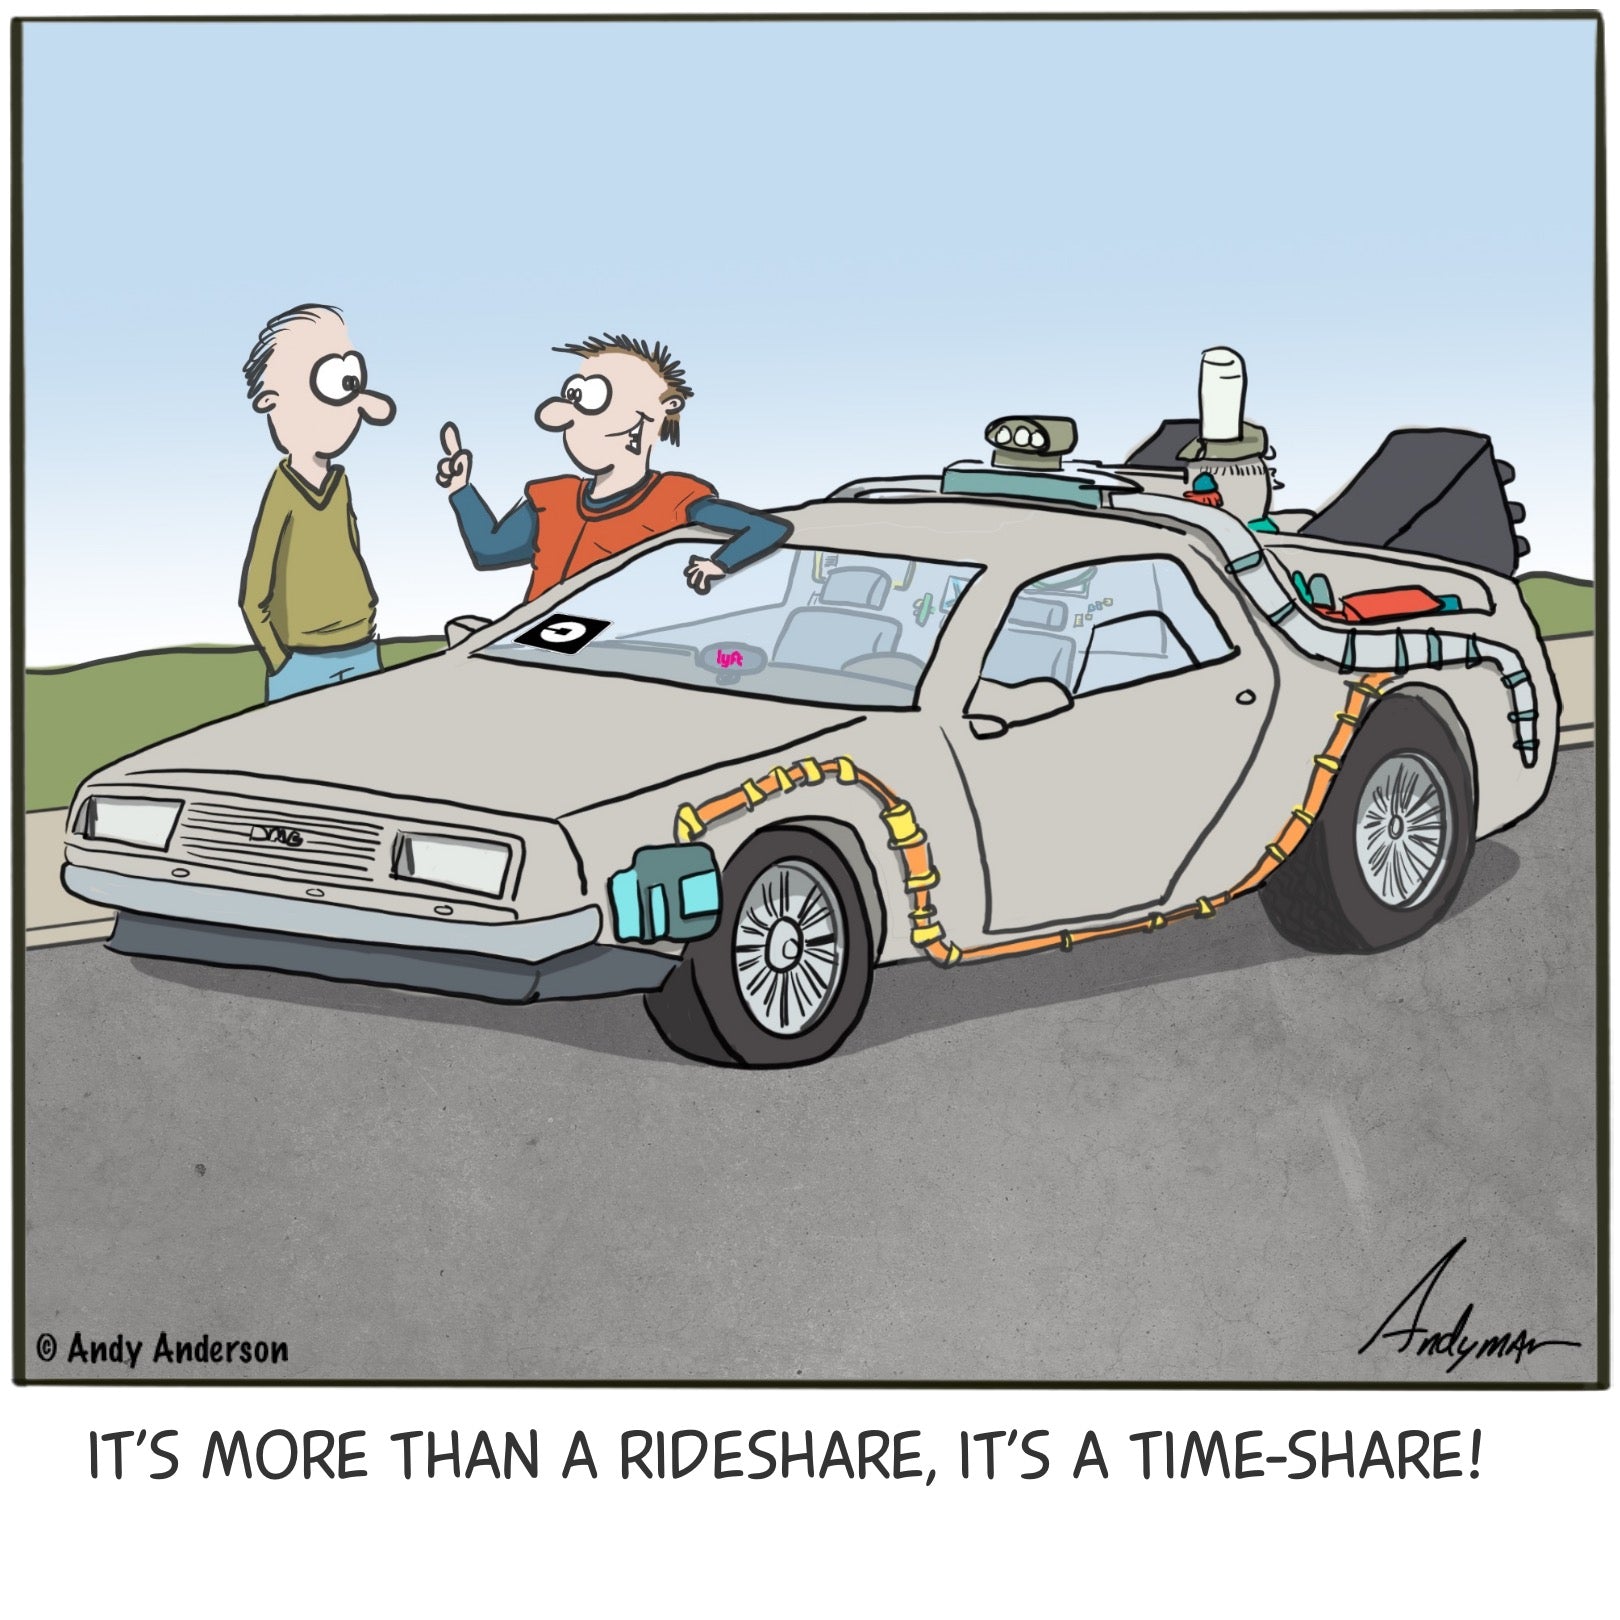 Cartoon about using a time-machine for ridesharing making it a time-share